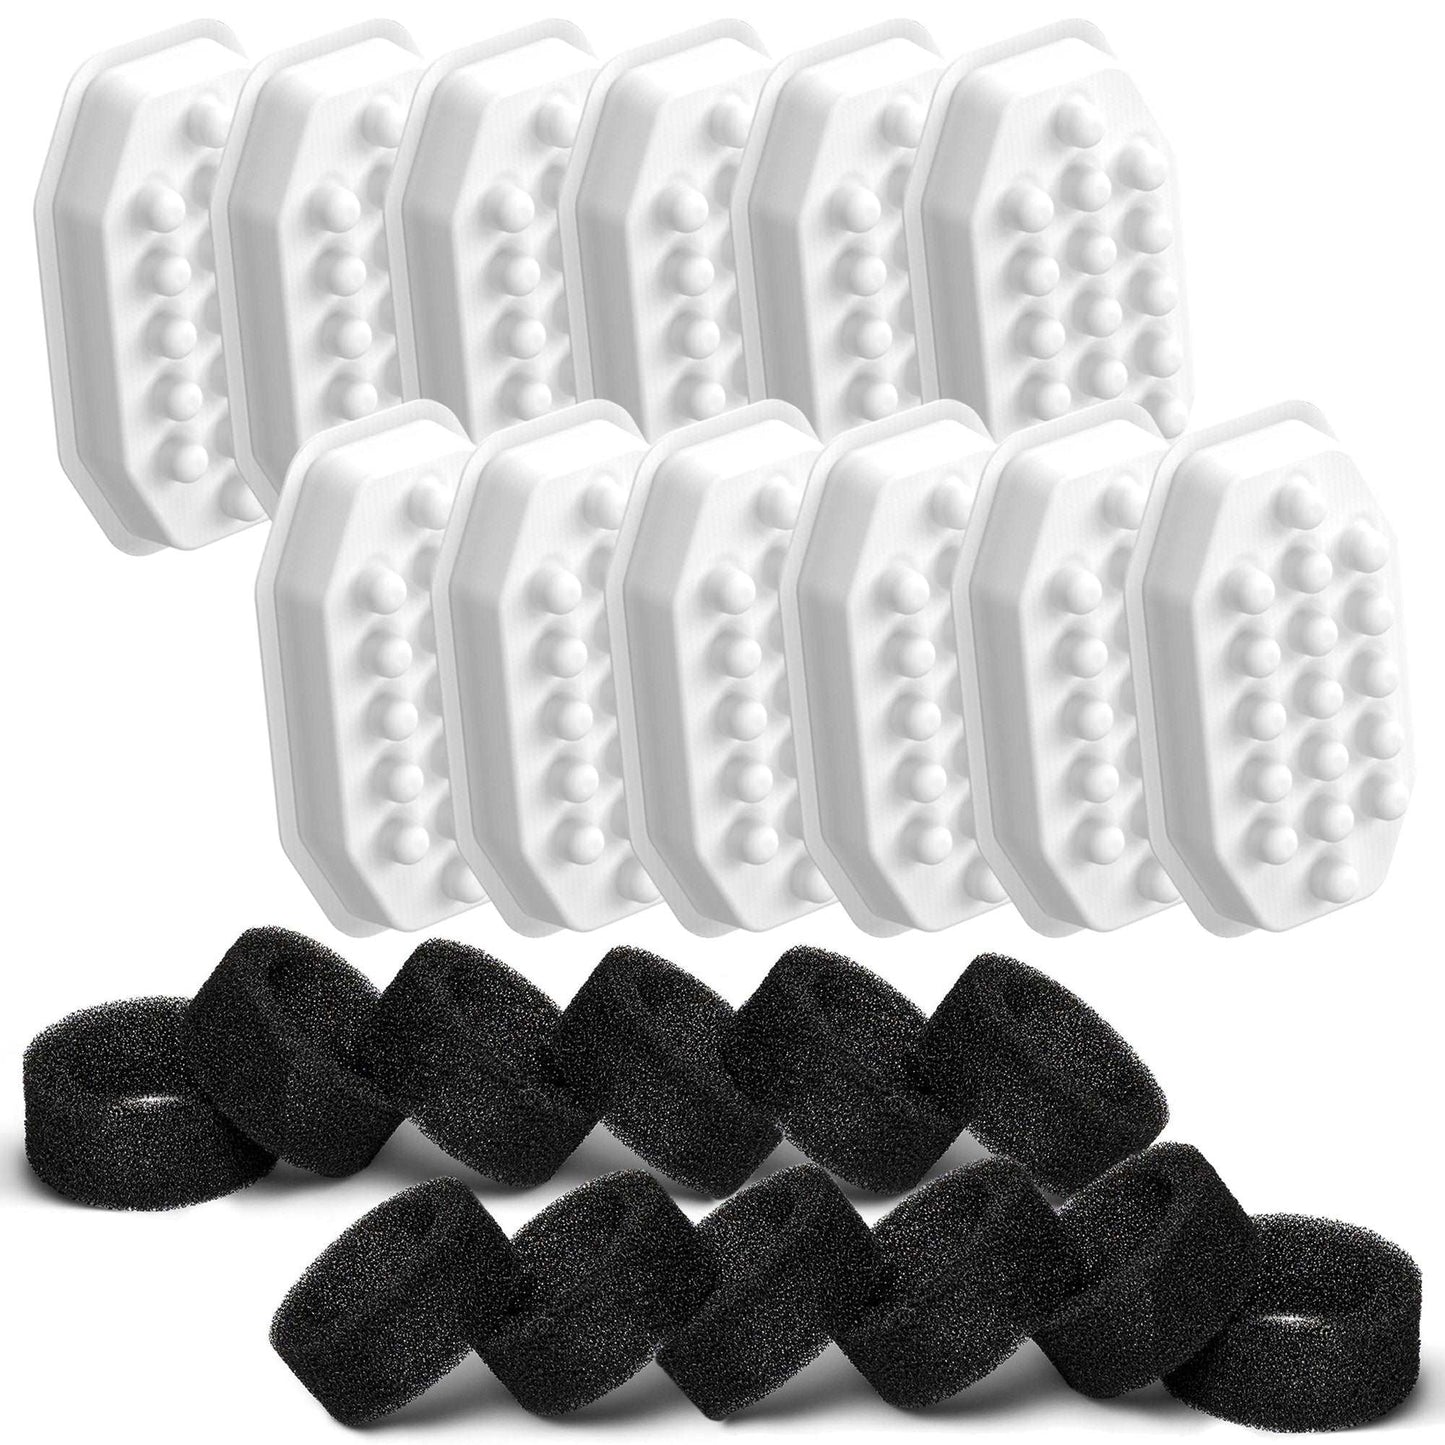 REPLACEMENT FILTER 12+12 - Rellaty